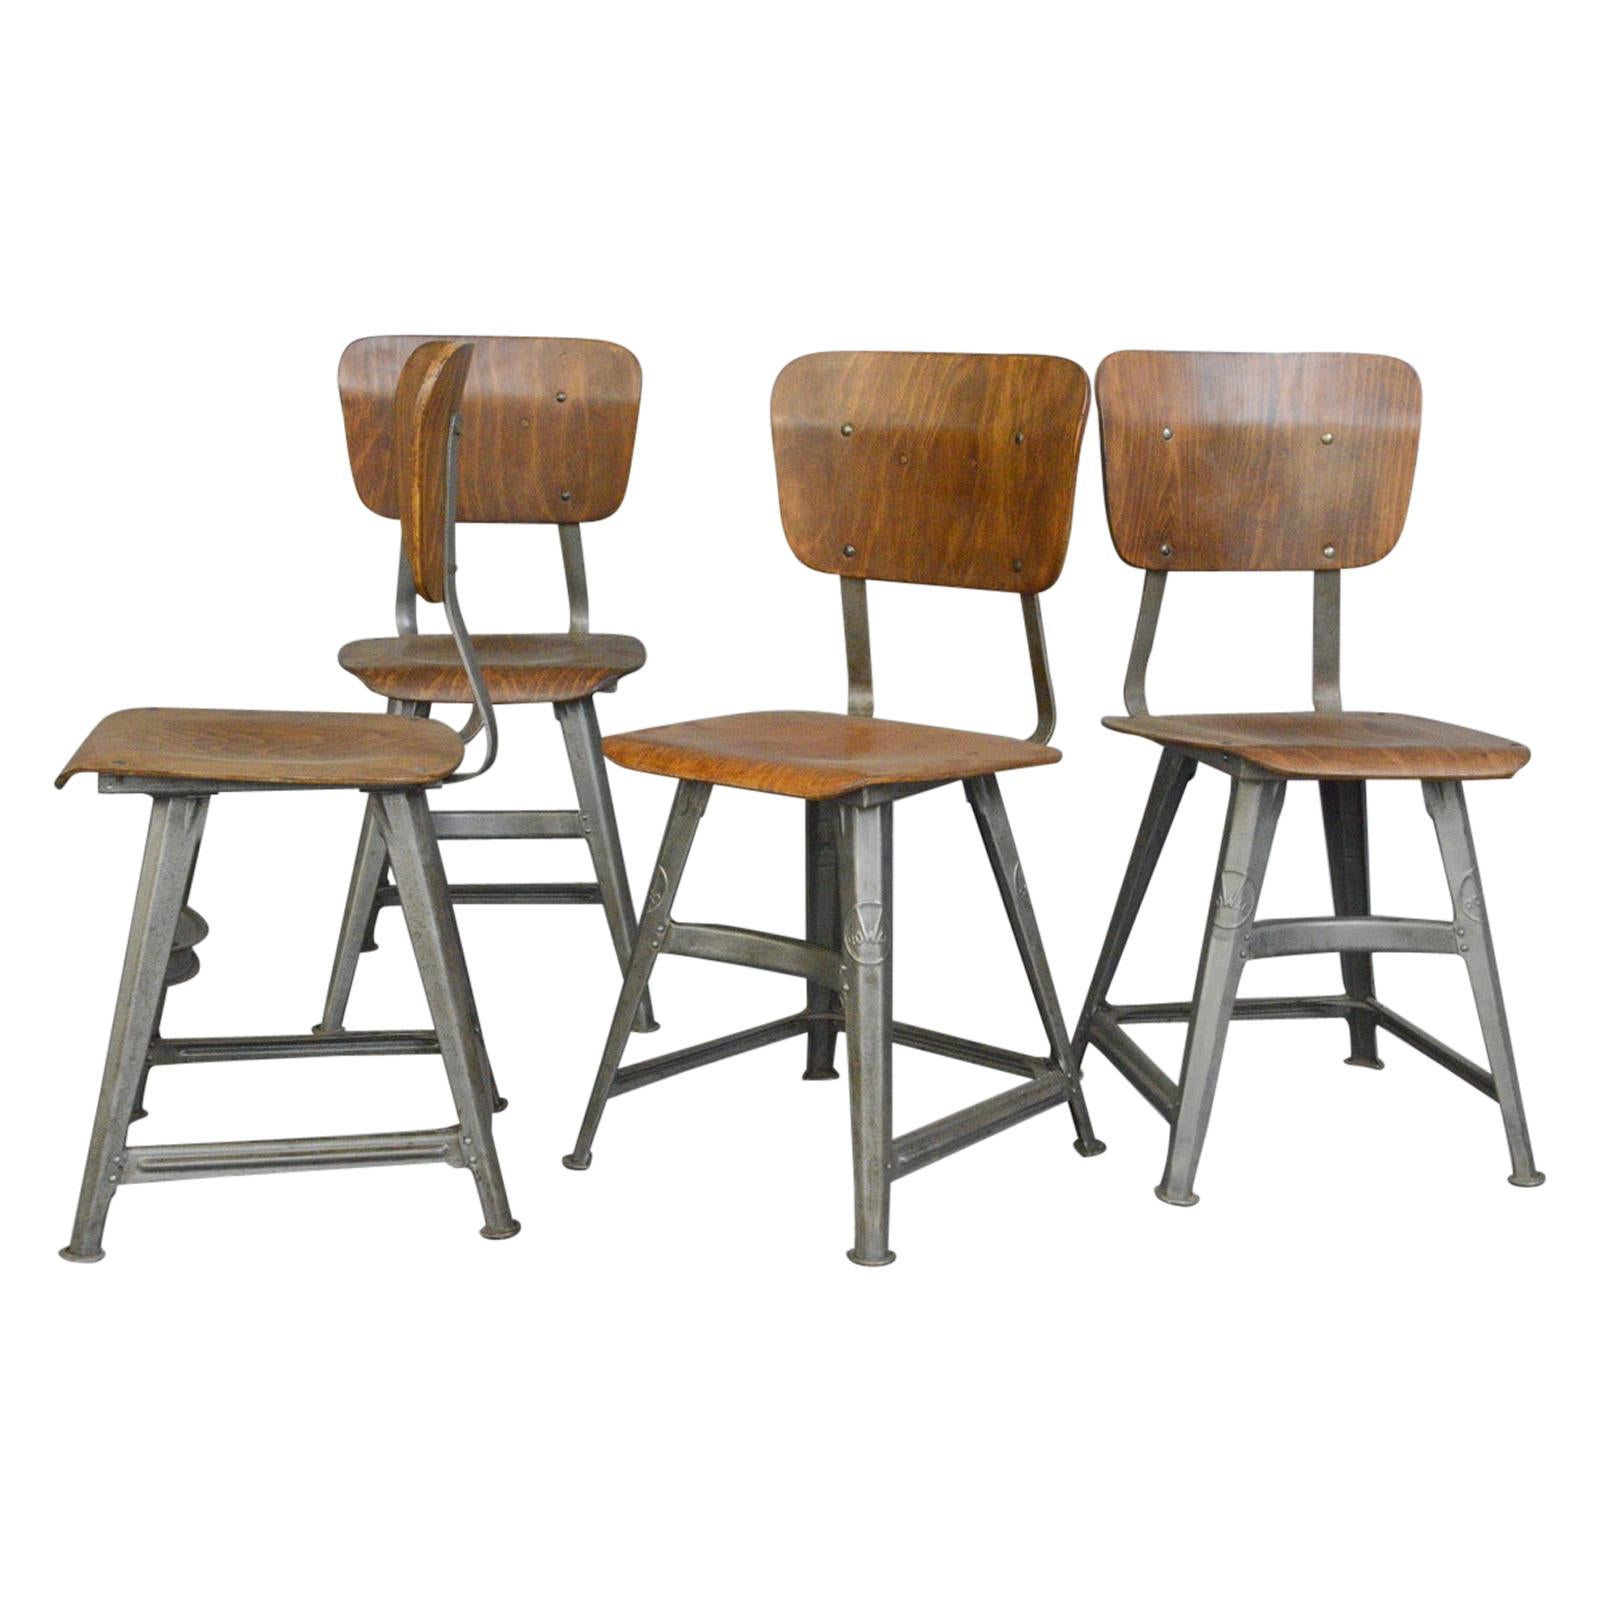 Industrial Factory Chairs by Rowac, circa 1920s